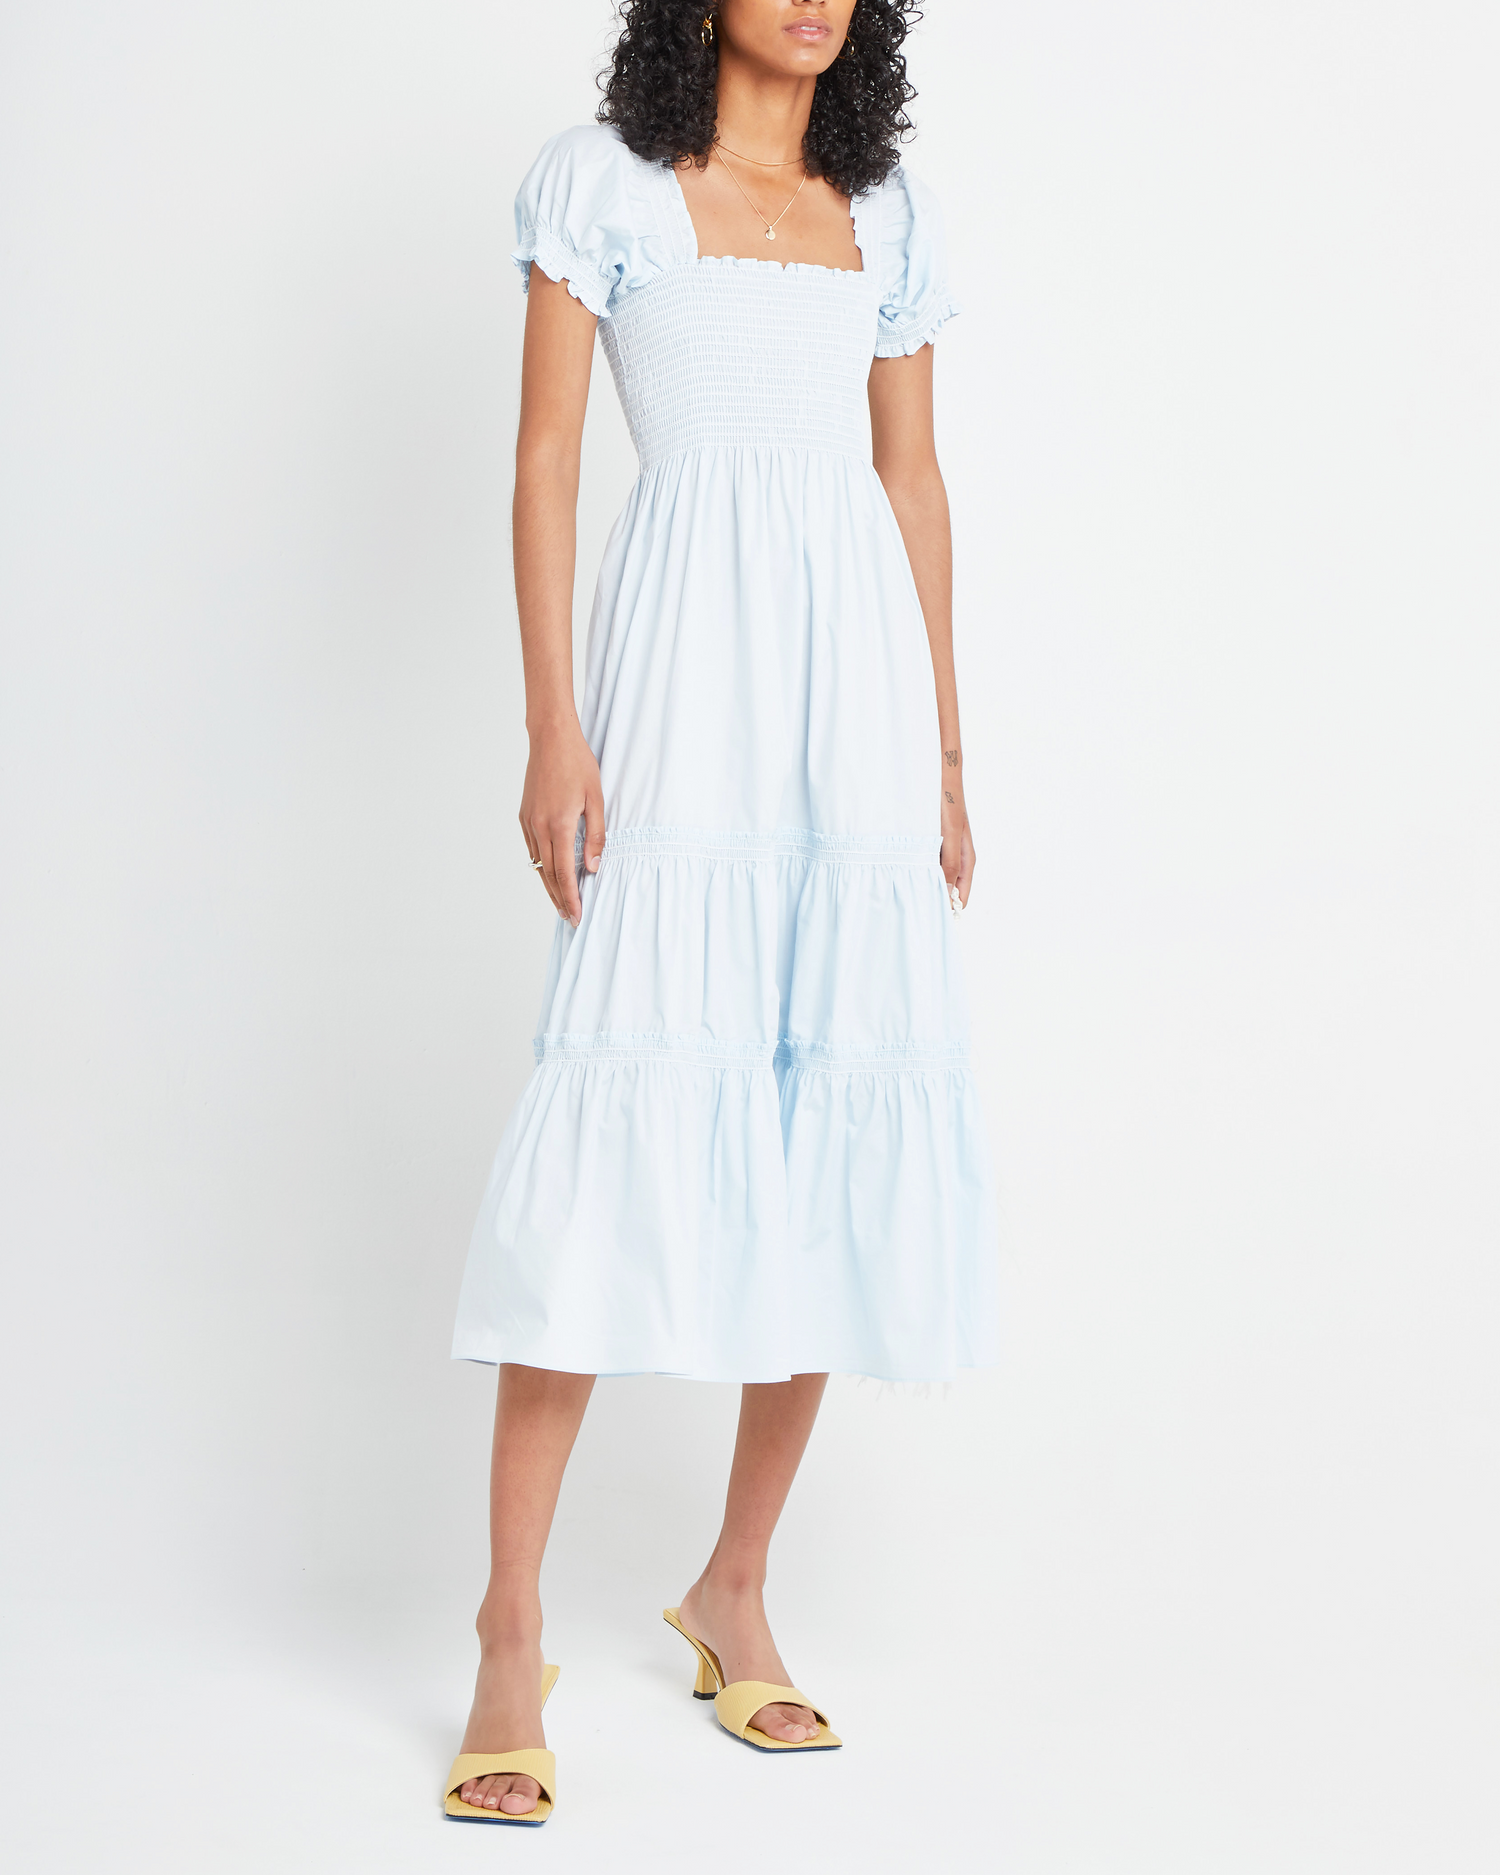 Fifth image of Square Neck Smocked Maxi Dress, a blue maxi dress, smocked, puff sleeves, short sleeves